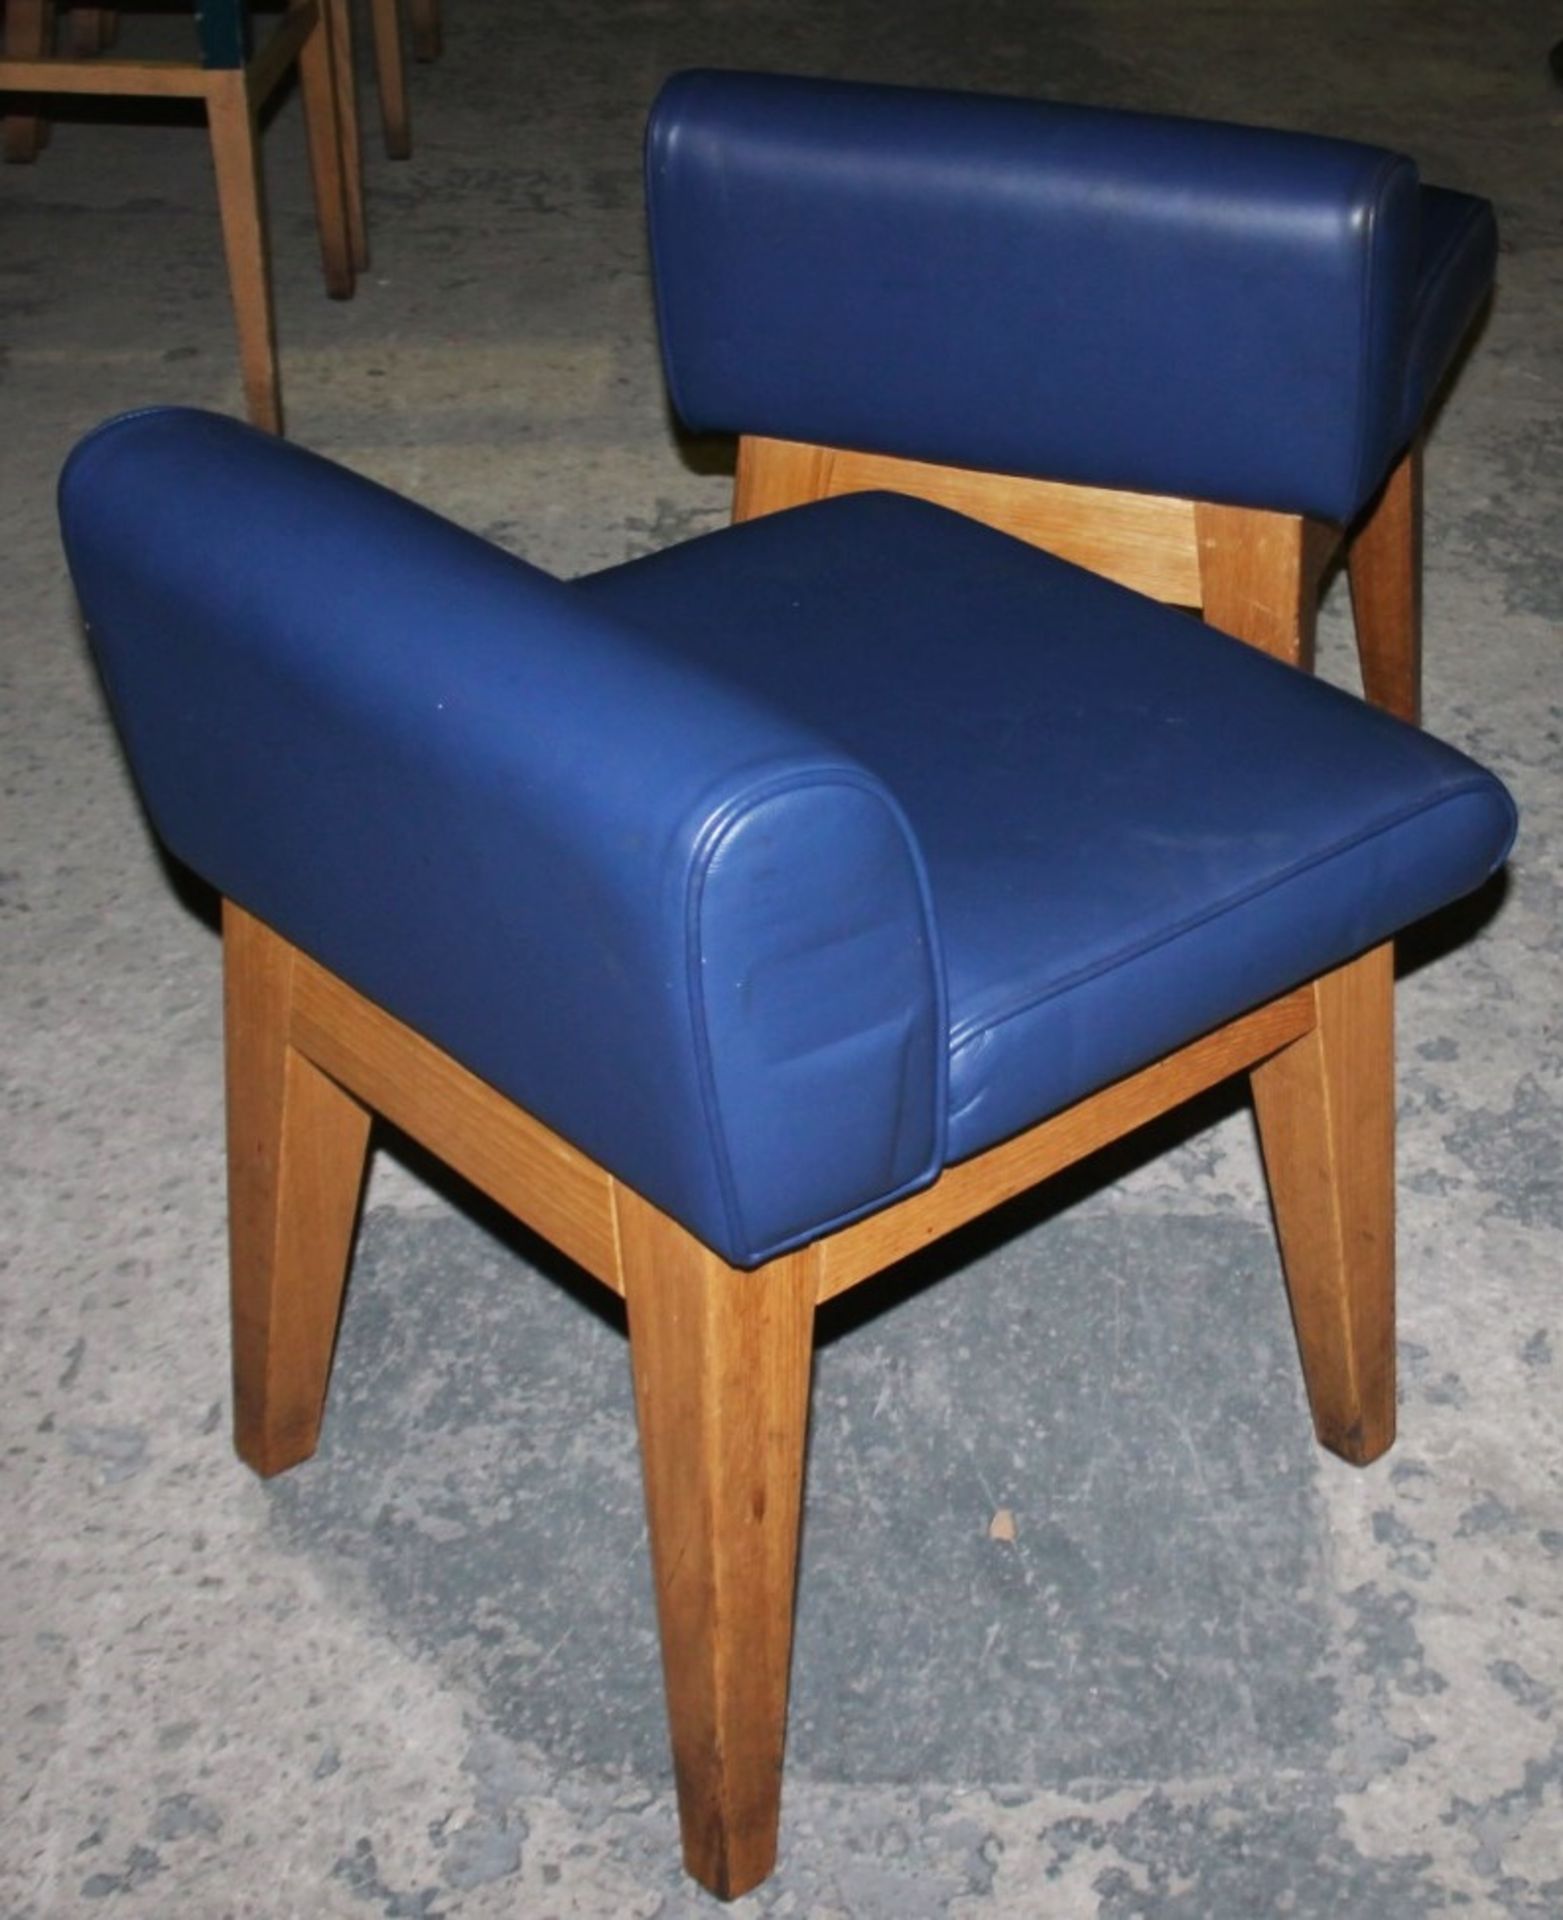 A Pair Of Stylish Low Back Restaurant Chairs With Bright Blue Faux Leather Upholstery - - Image 2 of 4